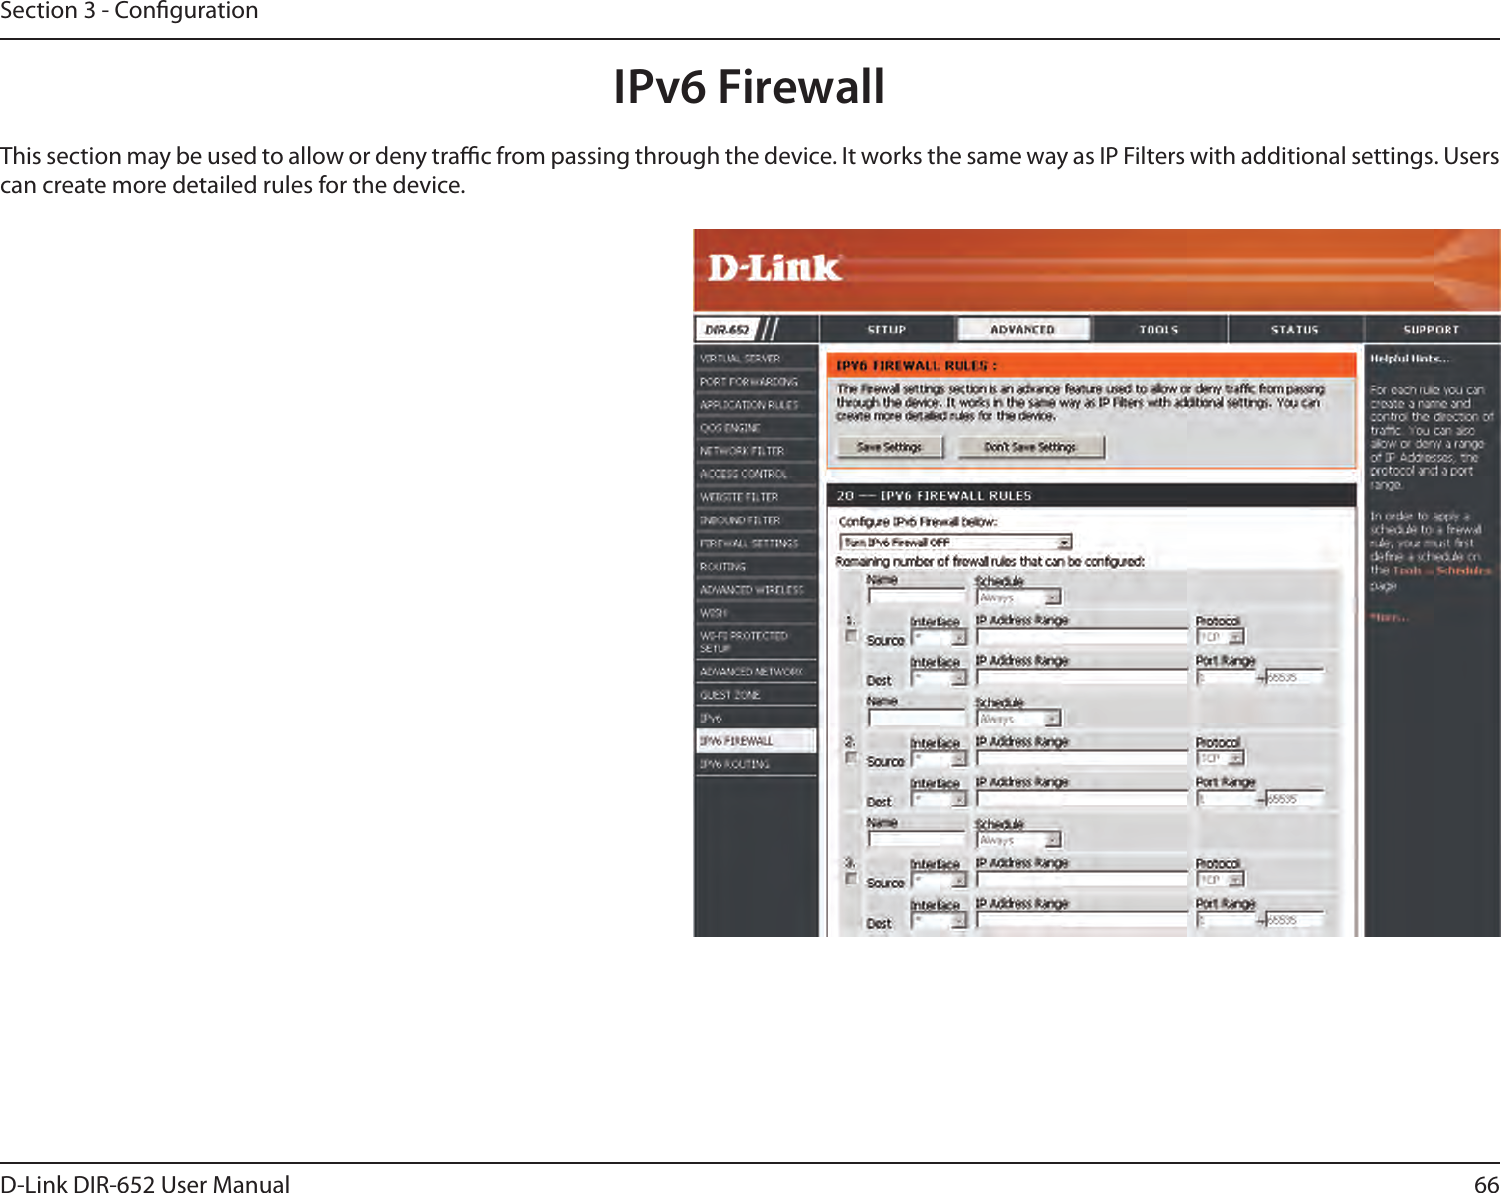 66D-Link DIR-652 User ManualSection 3 - CongurationIPv6 FirewallThis section may be used to allow or deny trac from passing through the device. It works the same way as IP Filters with additional settings. Users can create more detailed rules for the device. 